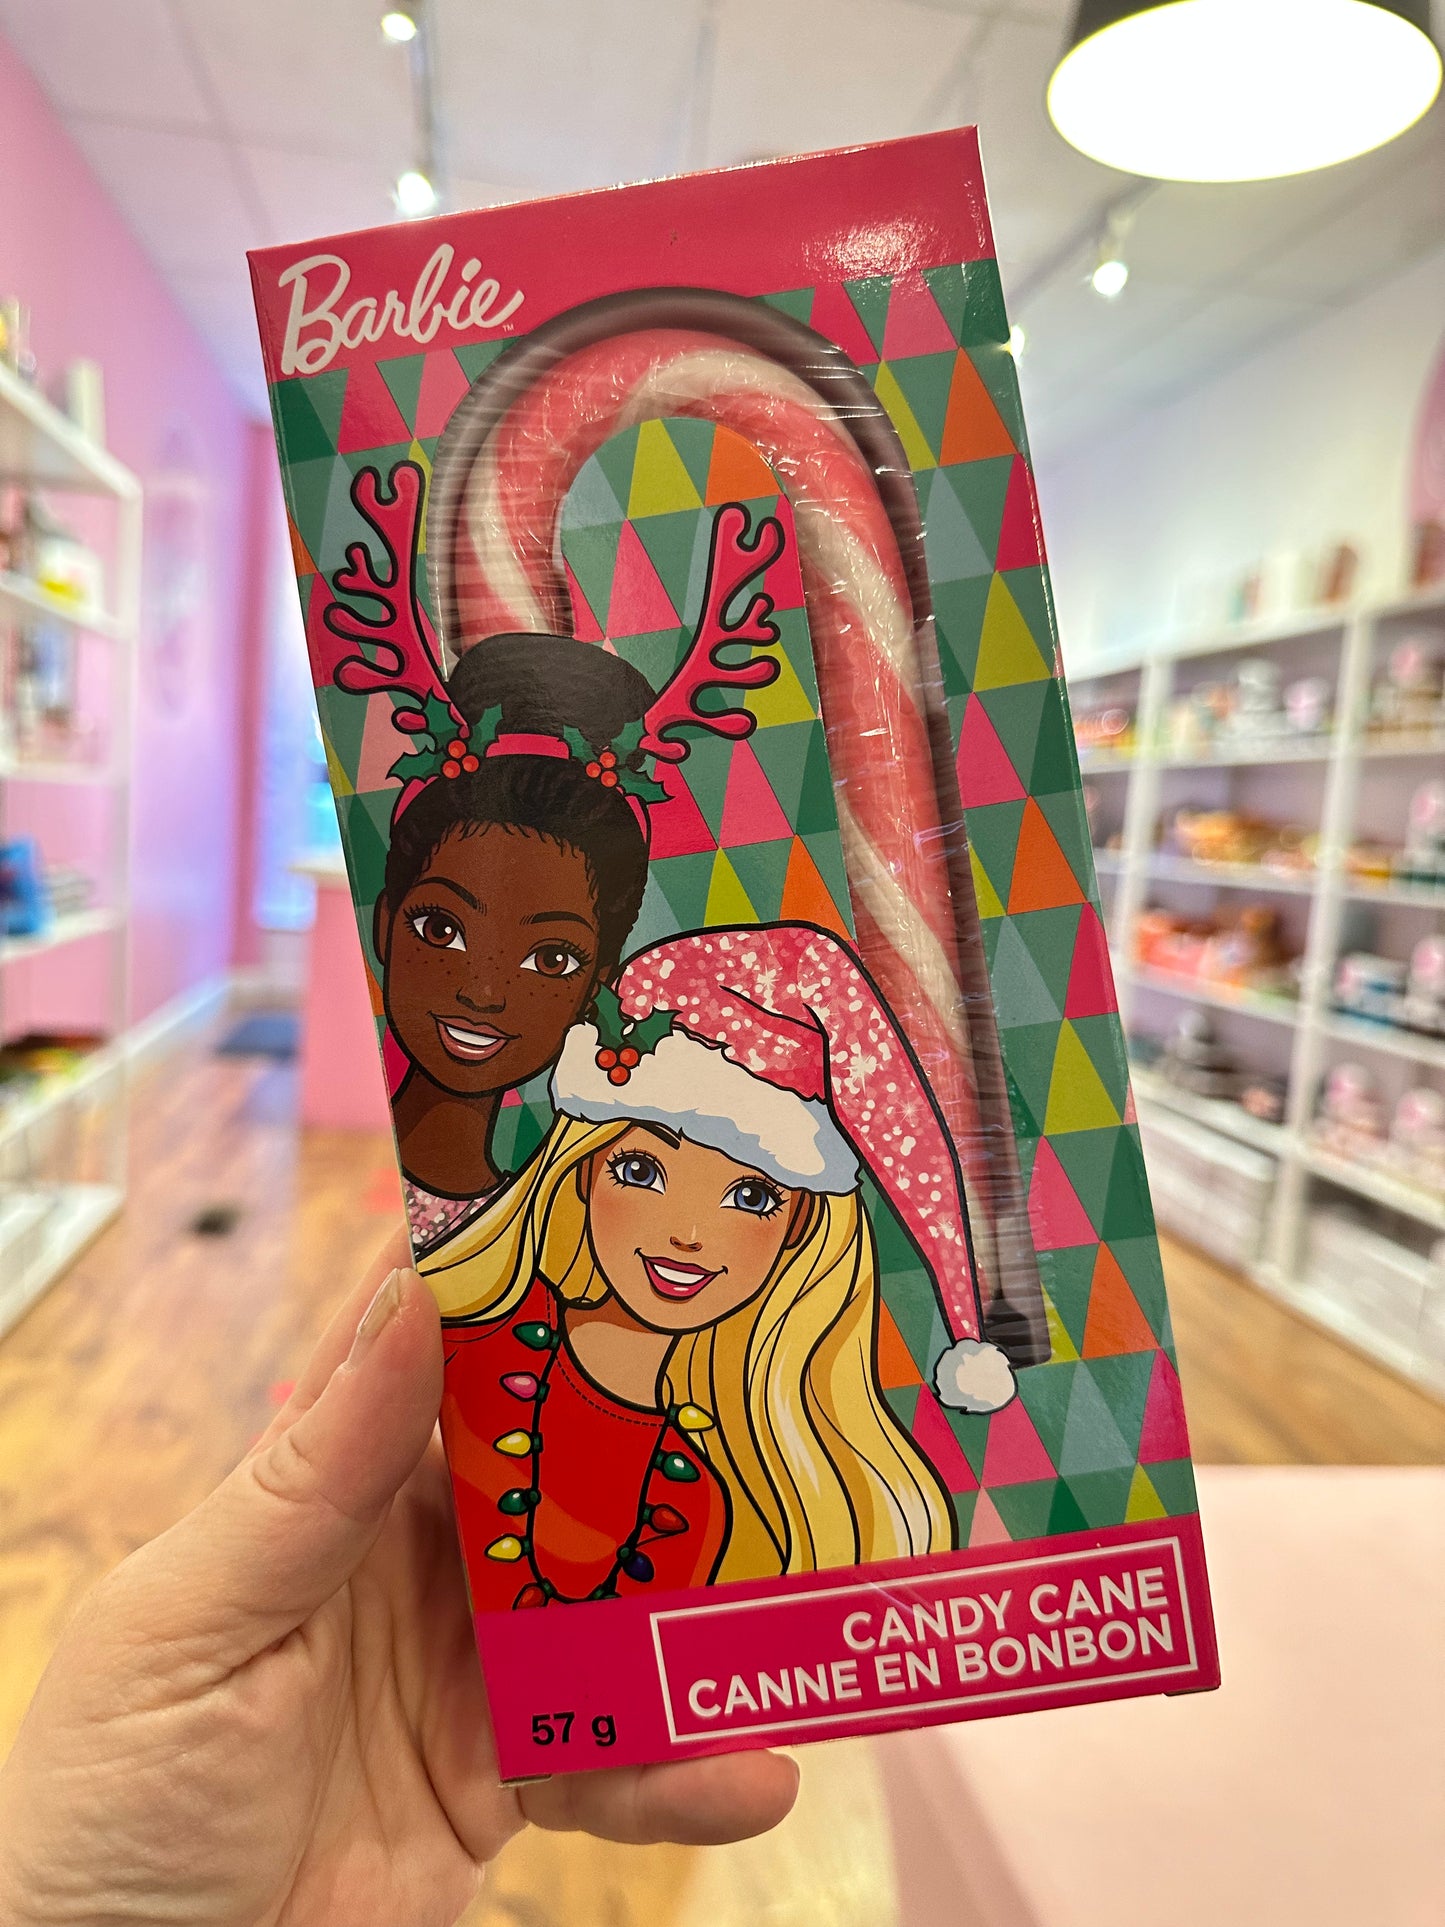 Giant Barbie Candy Cane